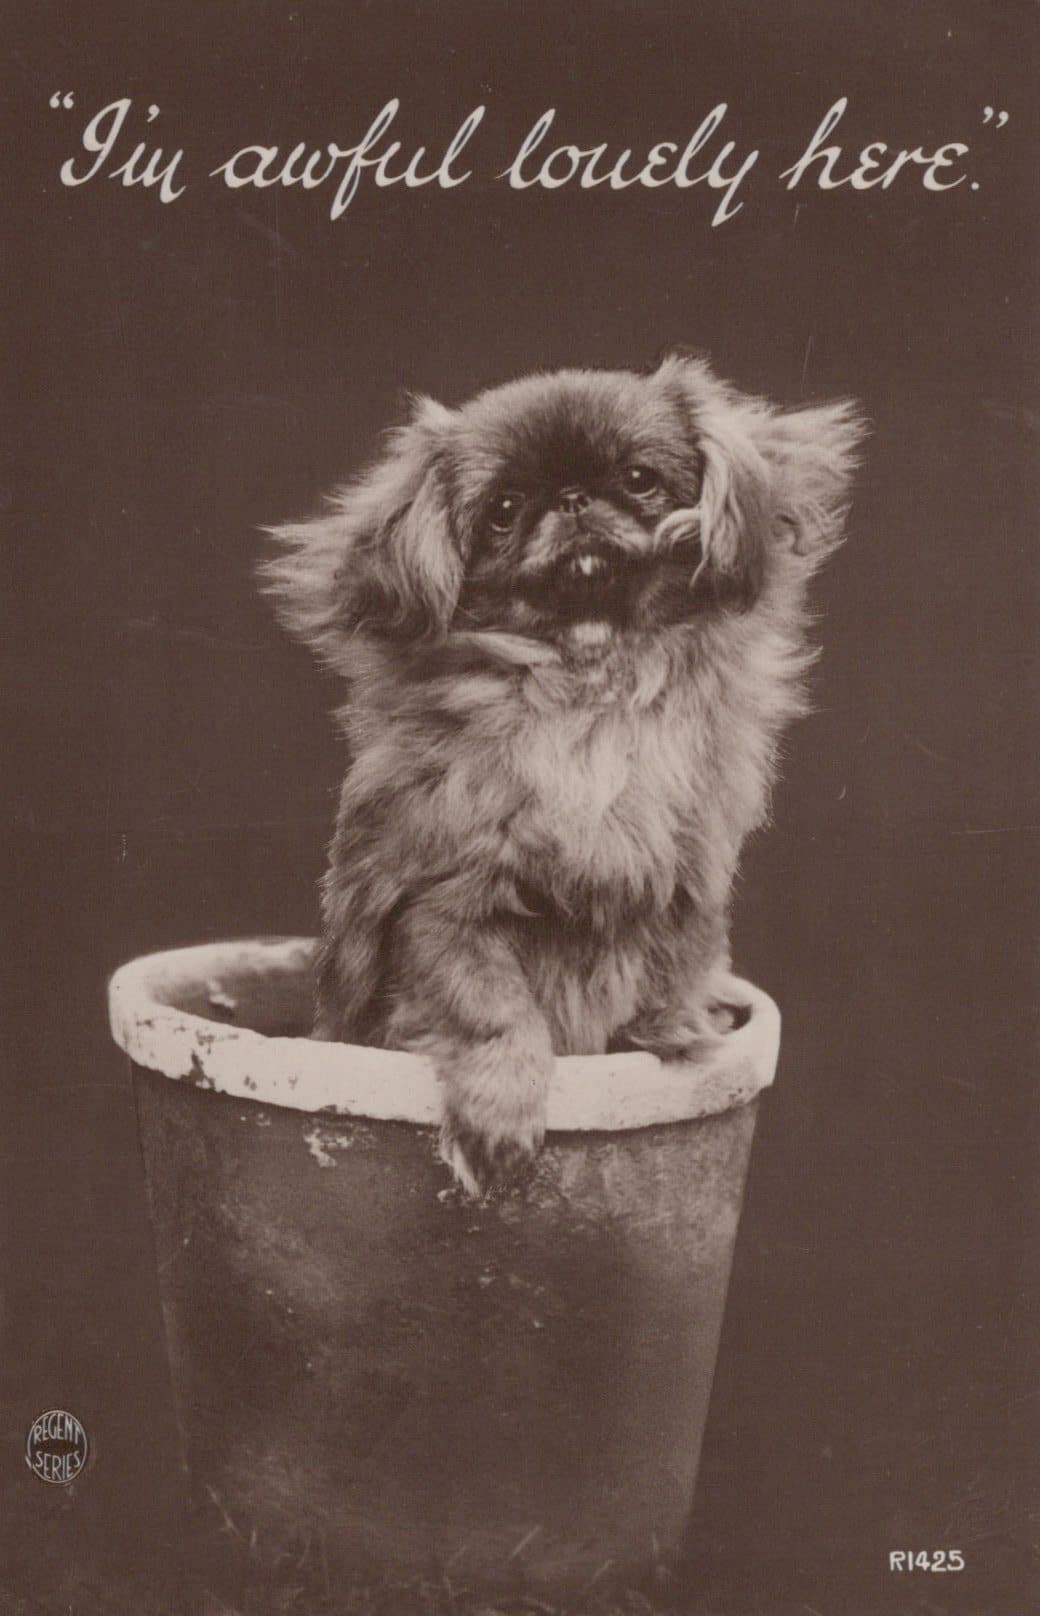 Animals Postcard - Dogs - Cute Dog in a Flower Pot - 